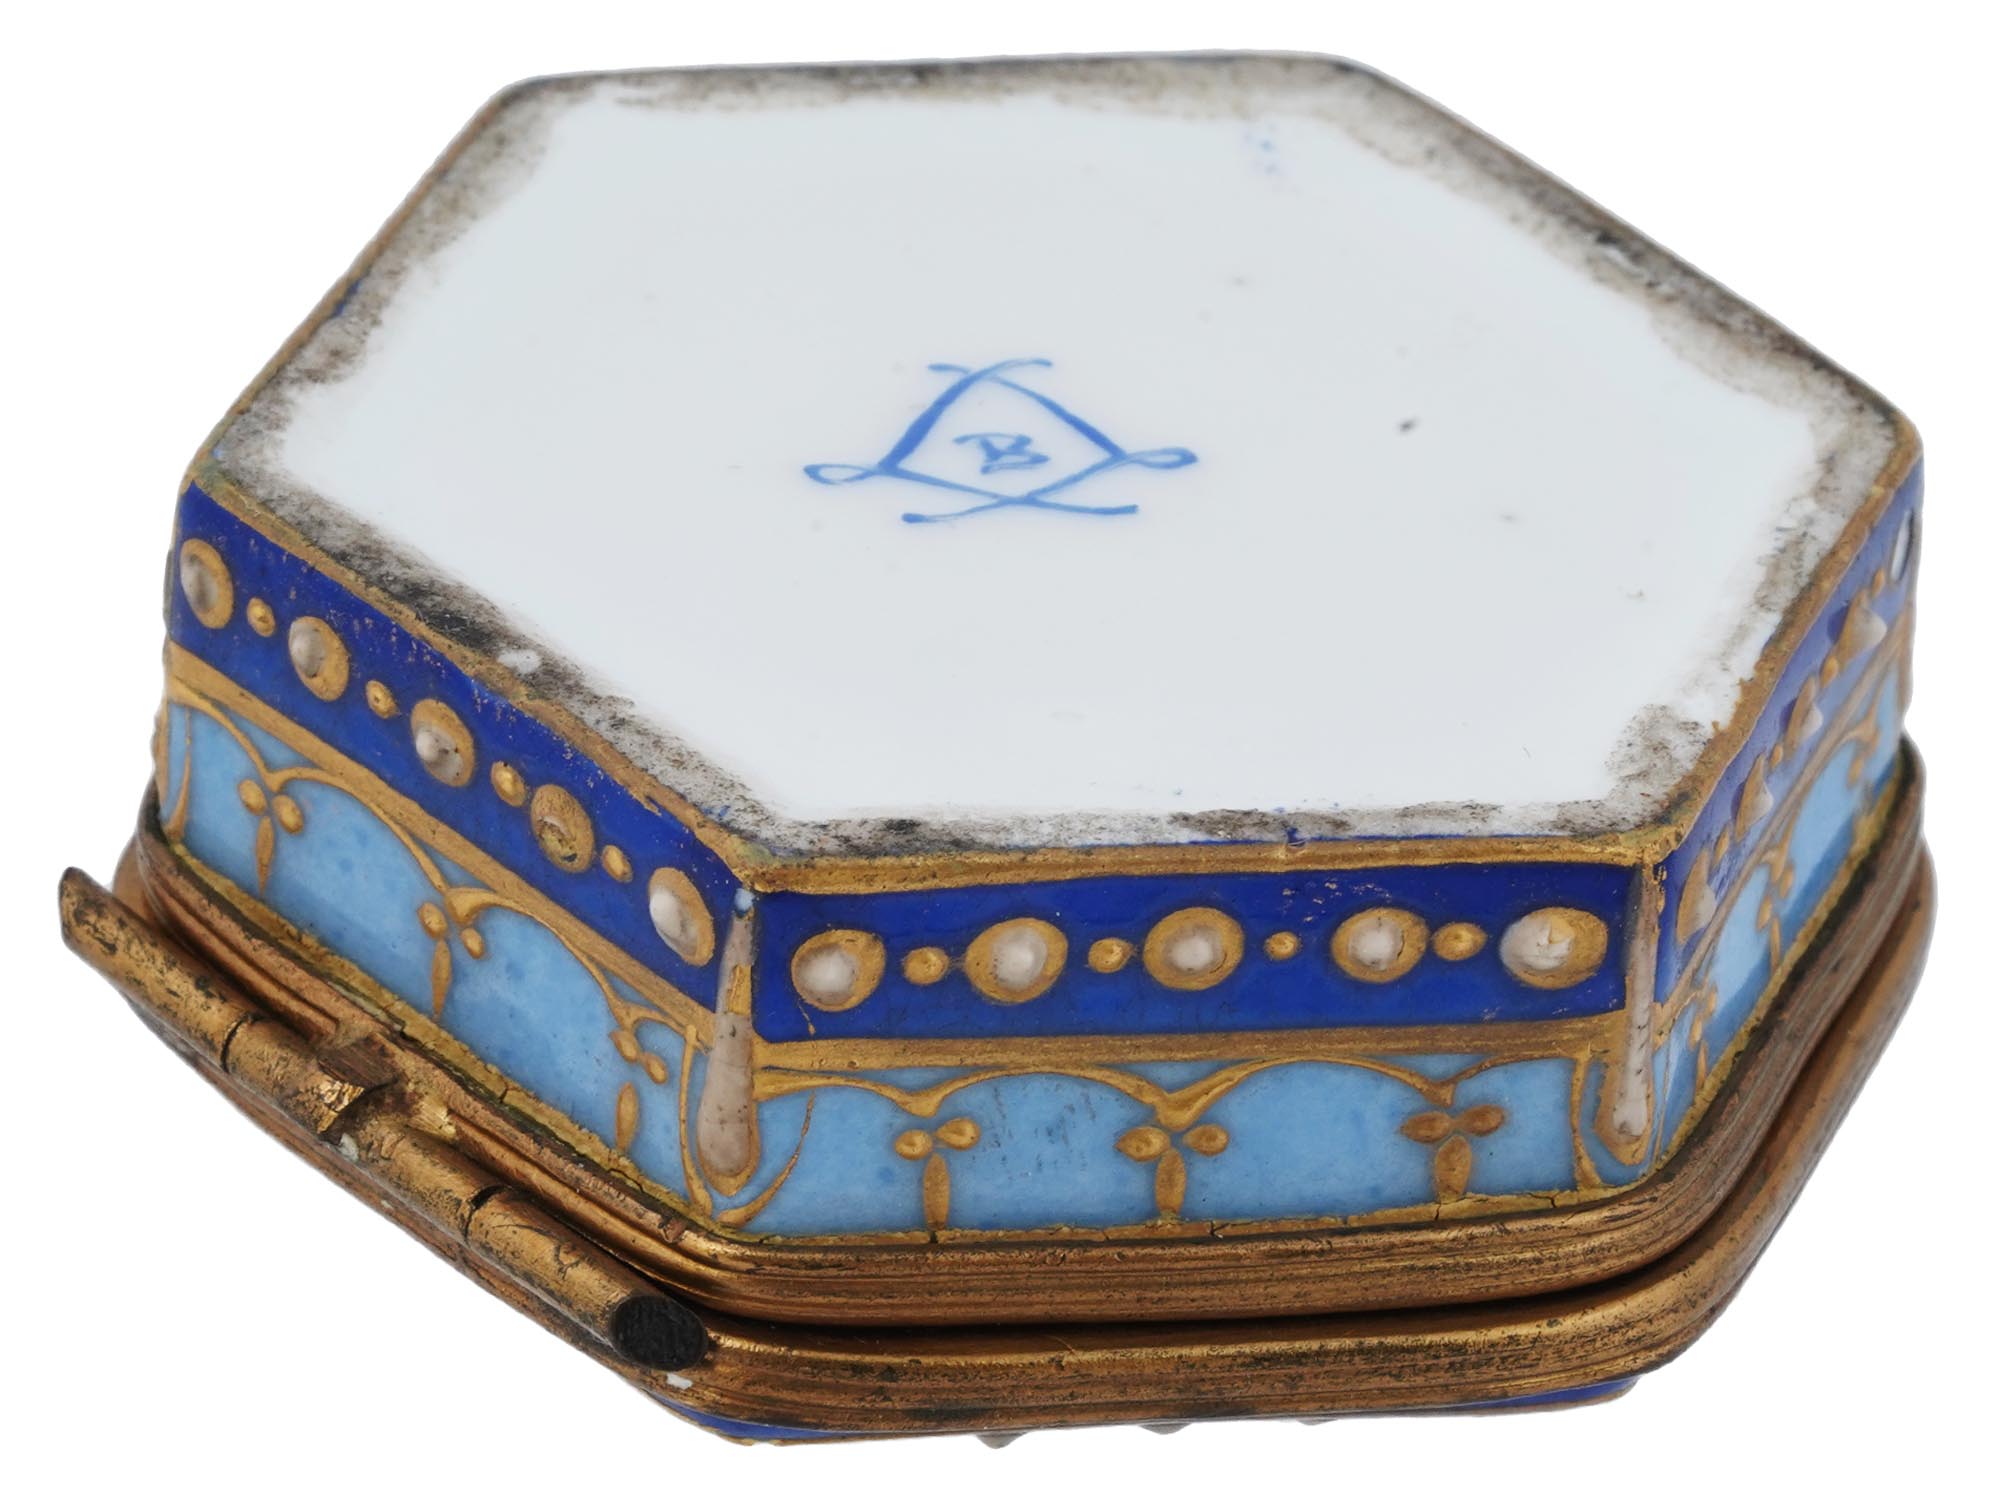 ANTIQUE SEVRES PORCELAIN SNUFF BOX WITH EAGLE PIC-1